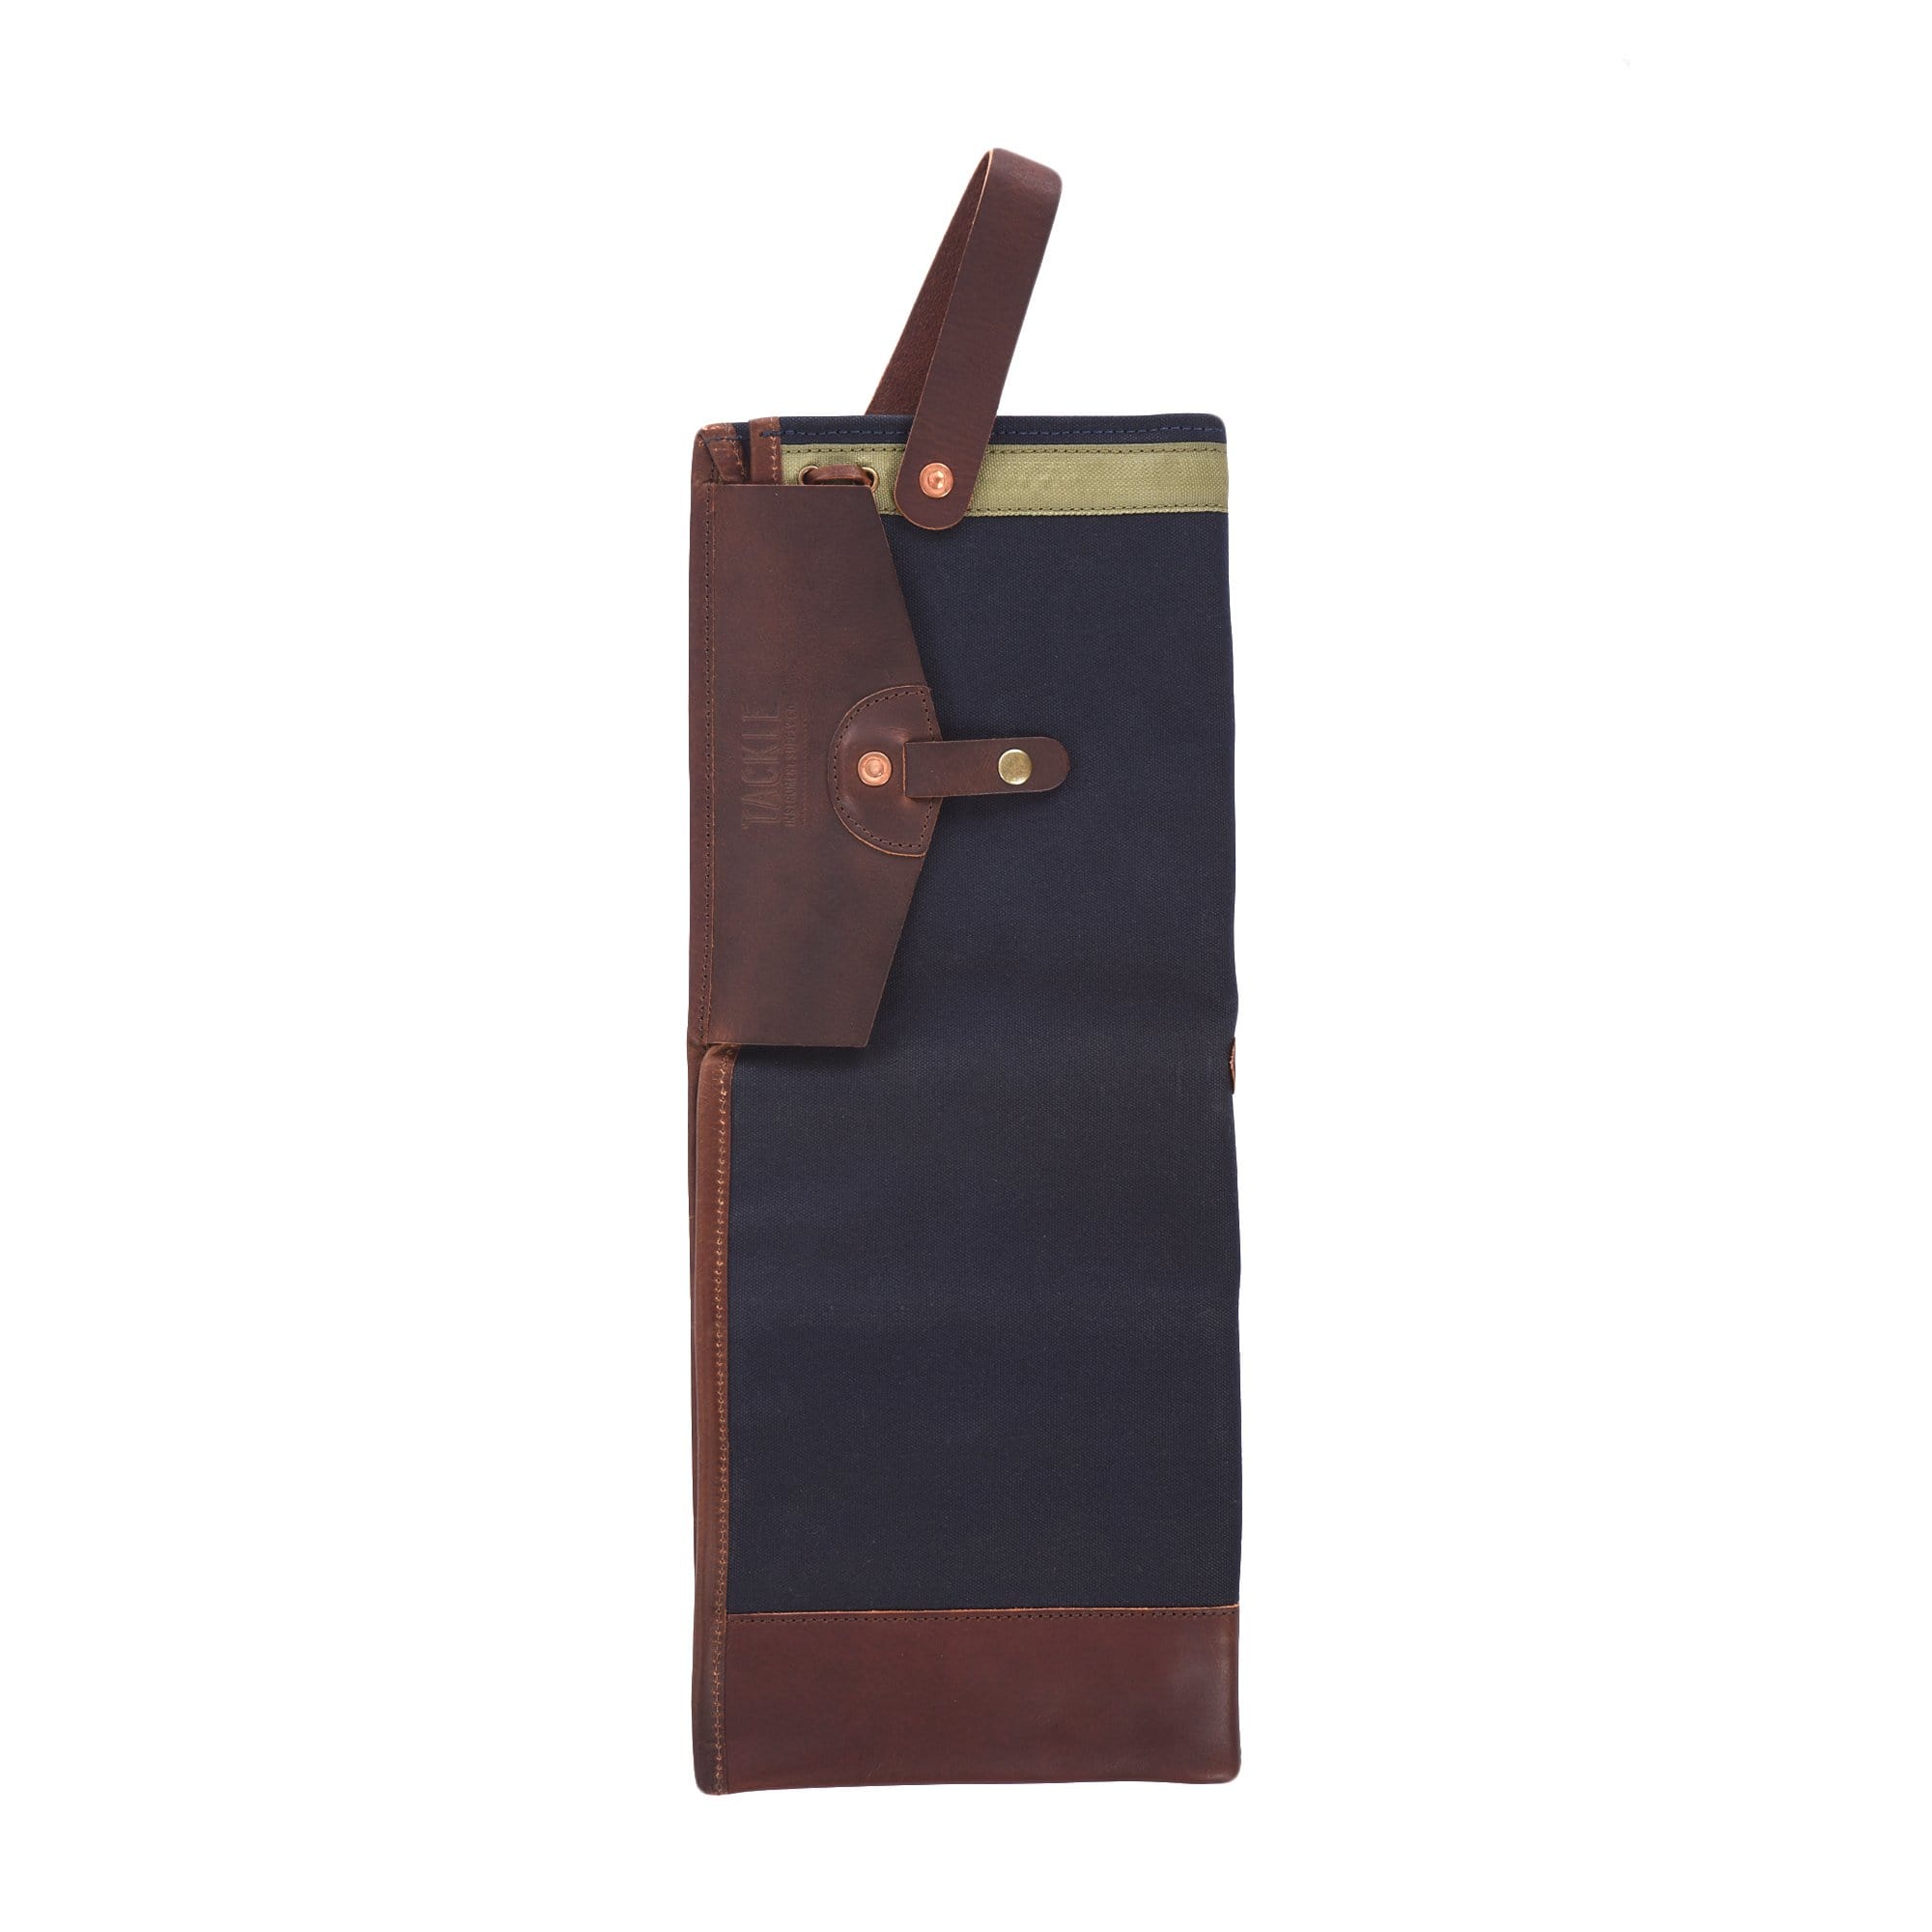 Tackle Waxed Canvas Bi-Fold Stick Bag Navy Drums and Percussion / Parts and Accessories / Cases and Bags